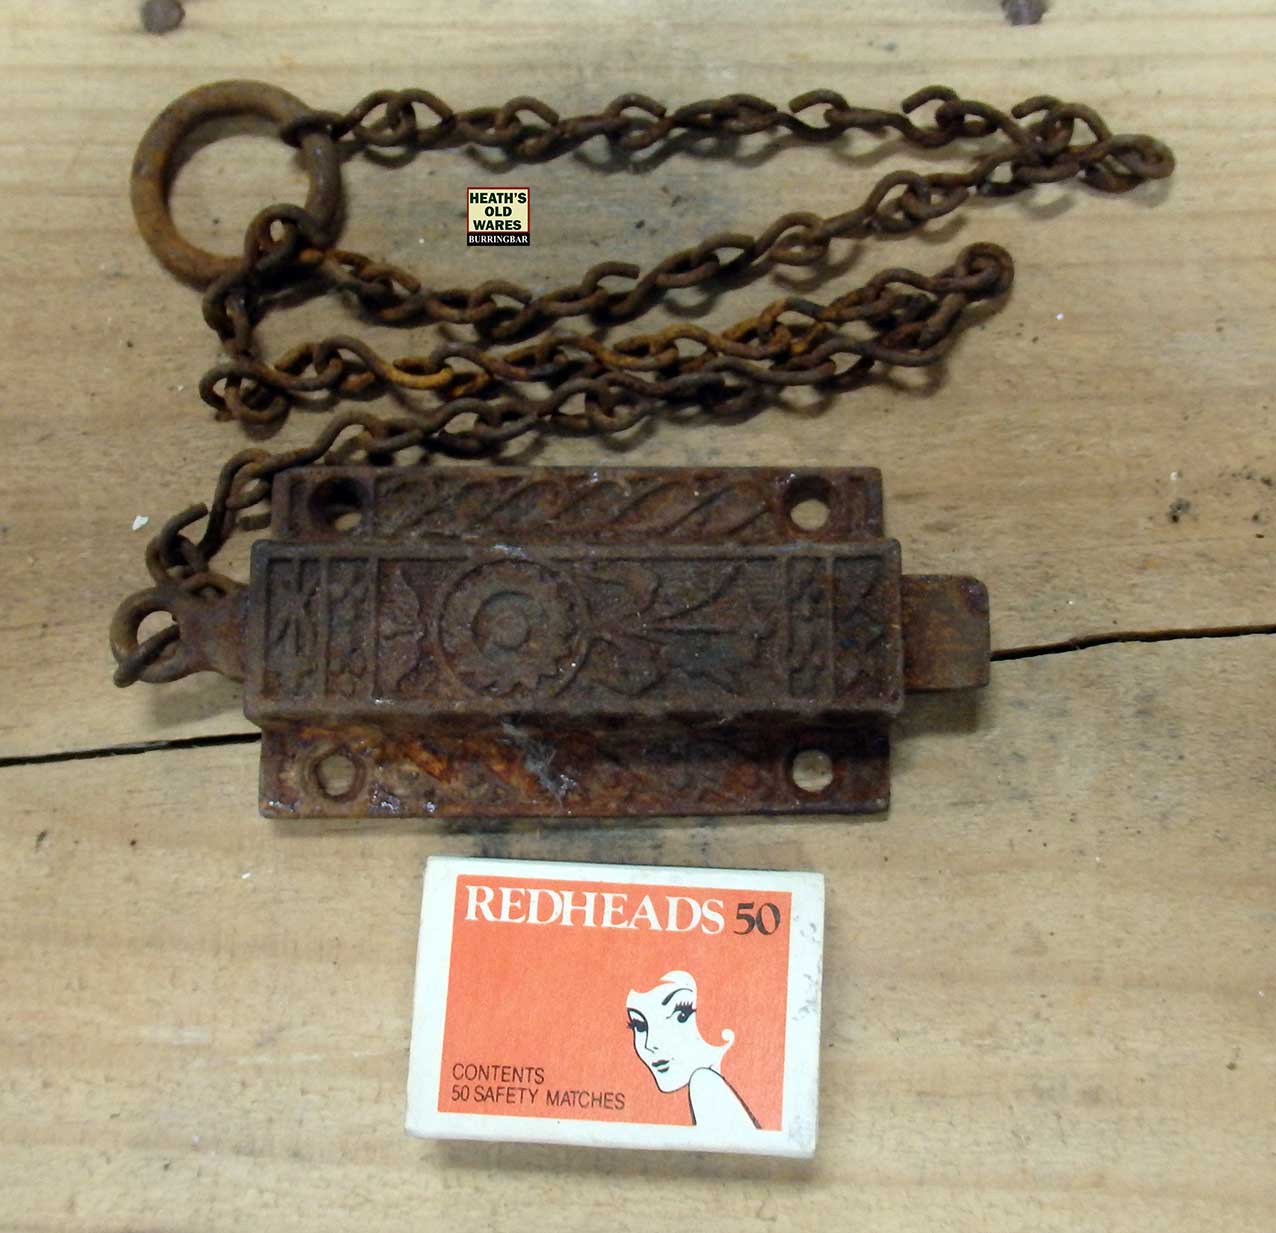 Antique ornate spring action slide bolt for sale at Heaths Old Wares, Collectables, Antiques & Industrial Antiques, 19-21 Broadway, Burringbar NSW 2483 Ph 0266771181 open 7 days